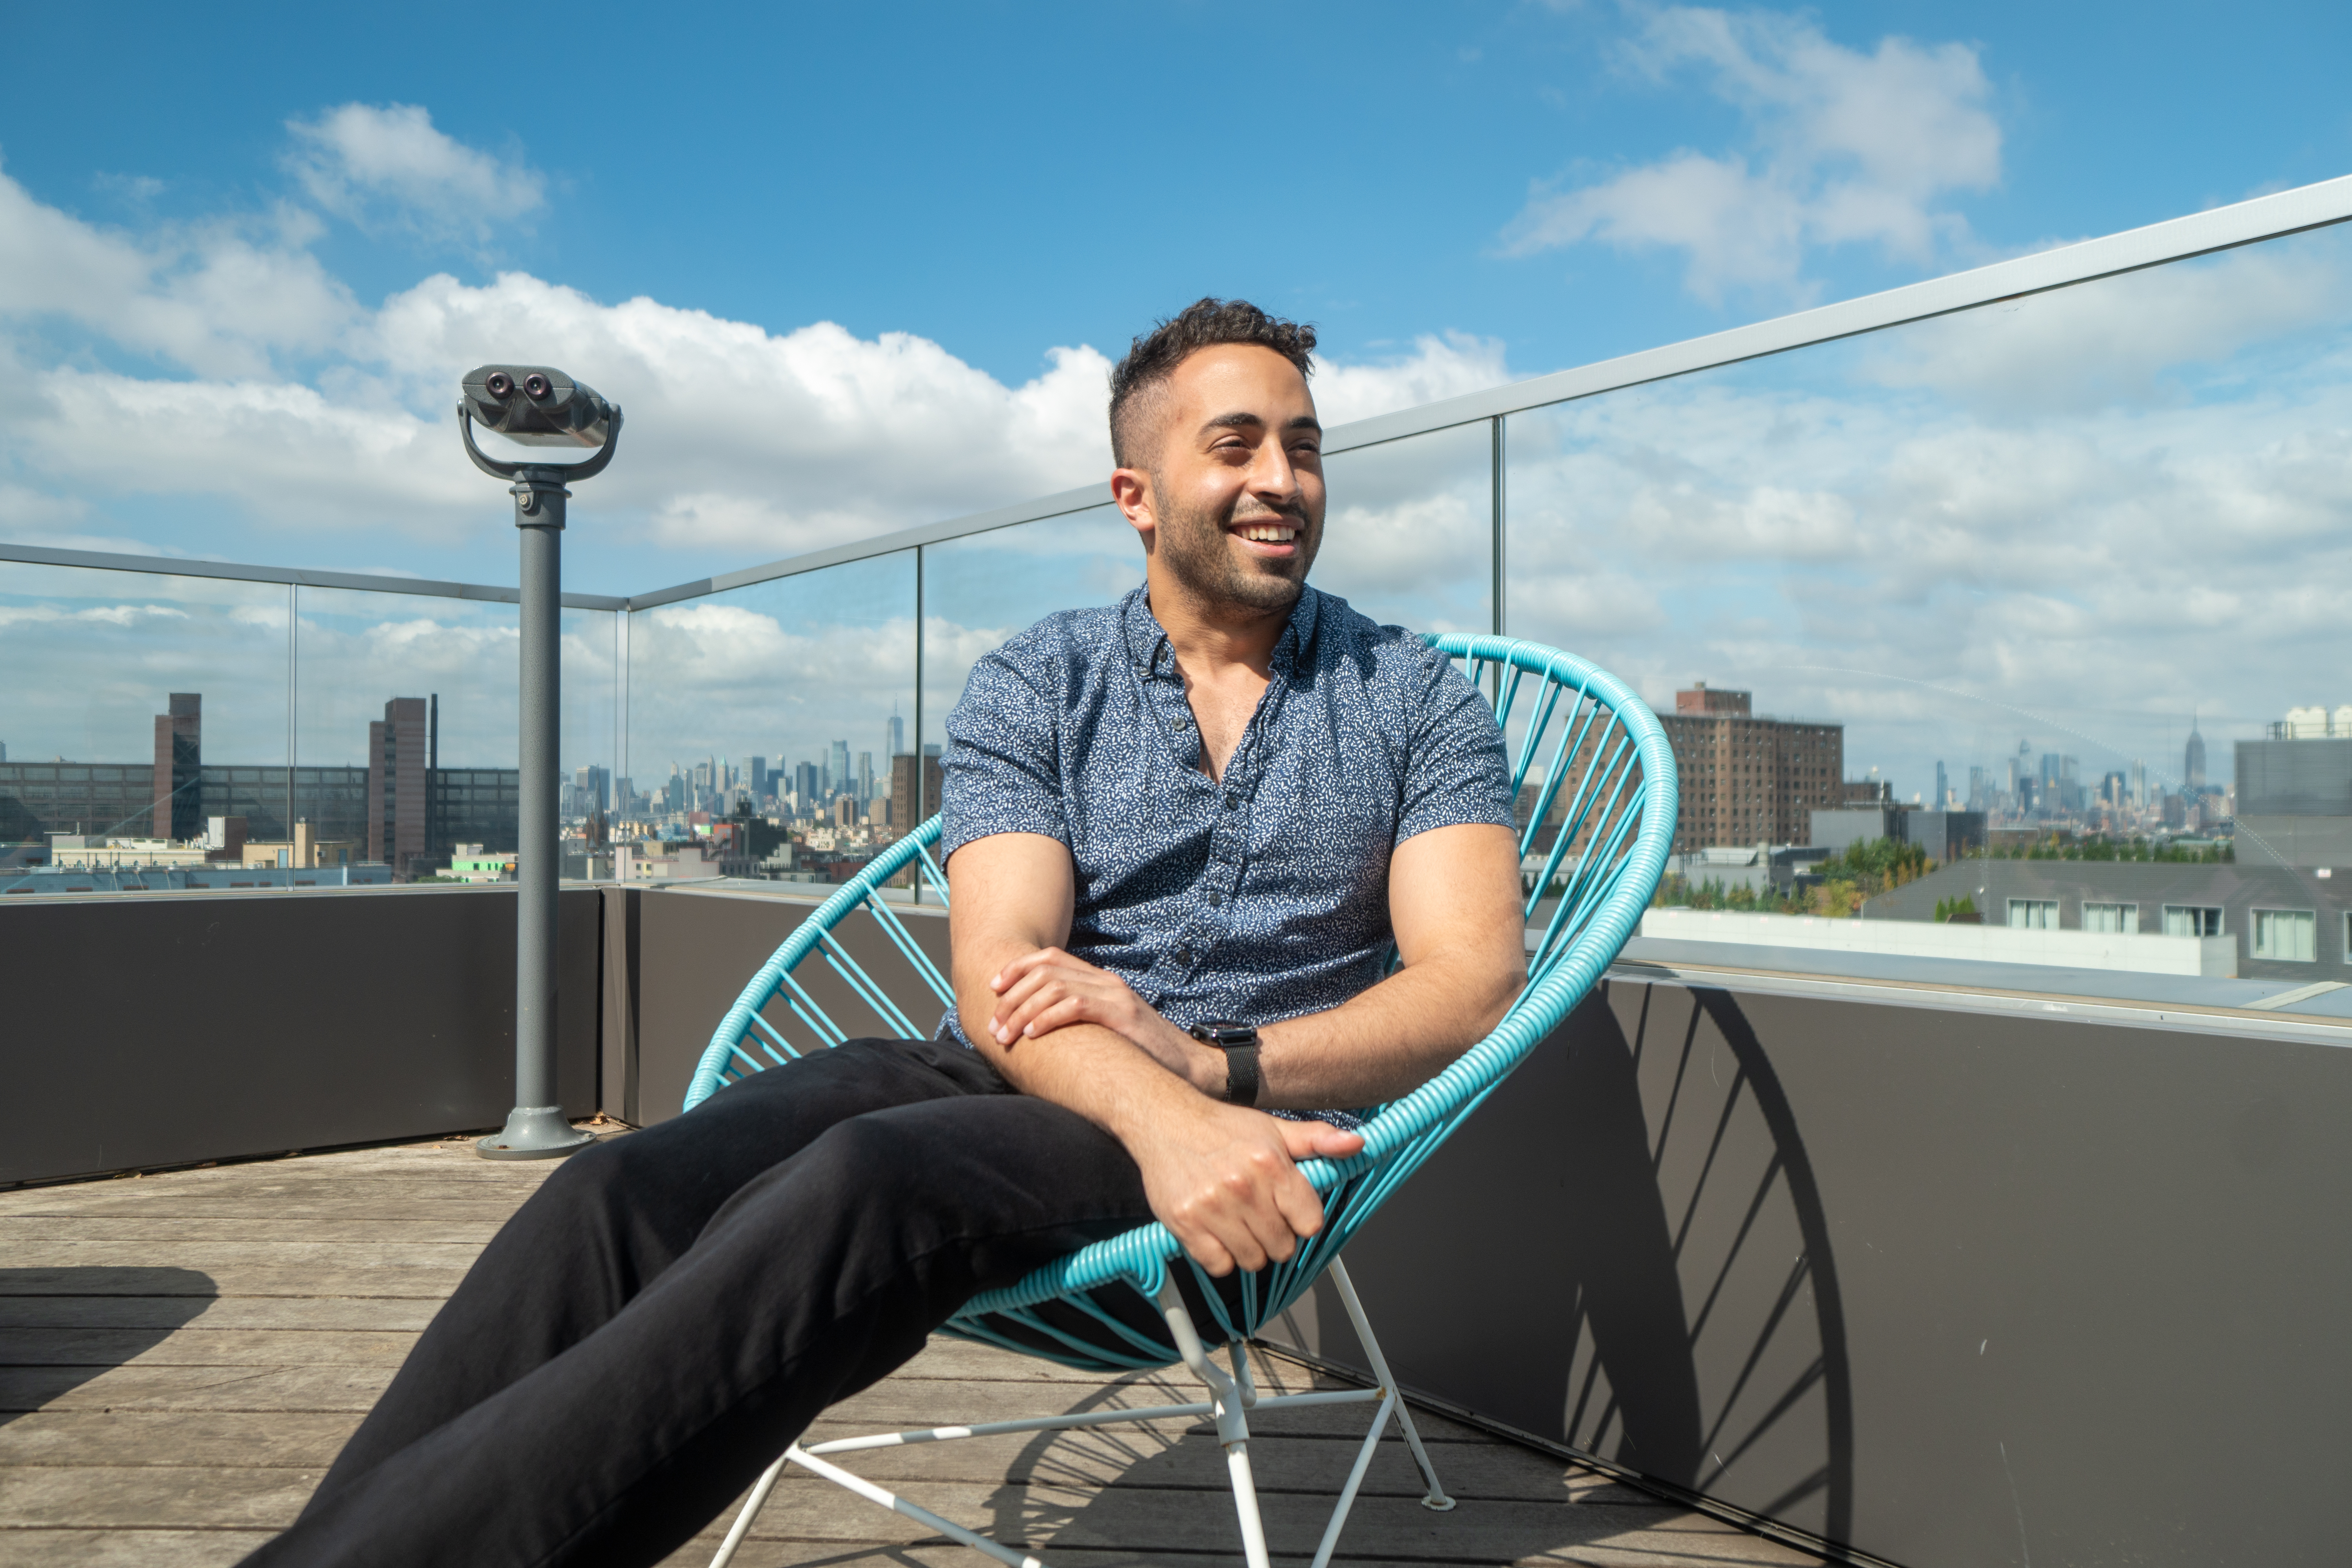 A photo of Ismail smiling now that he lives at the Denizen while enjoying the rooftop